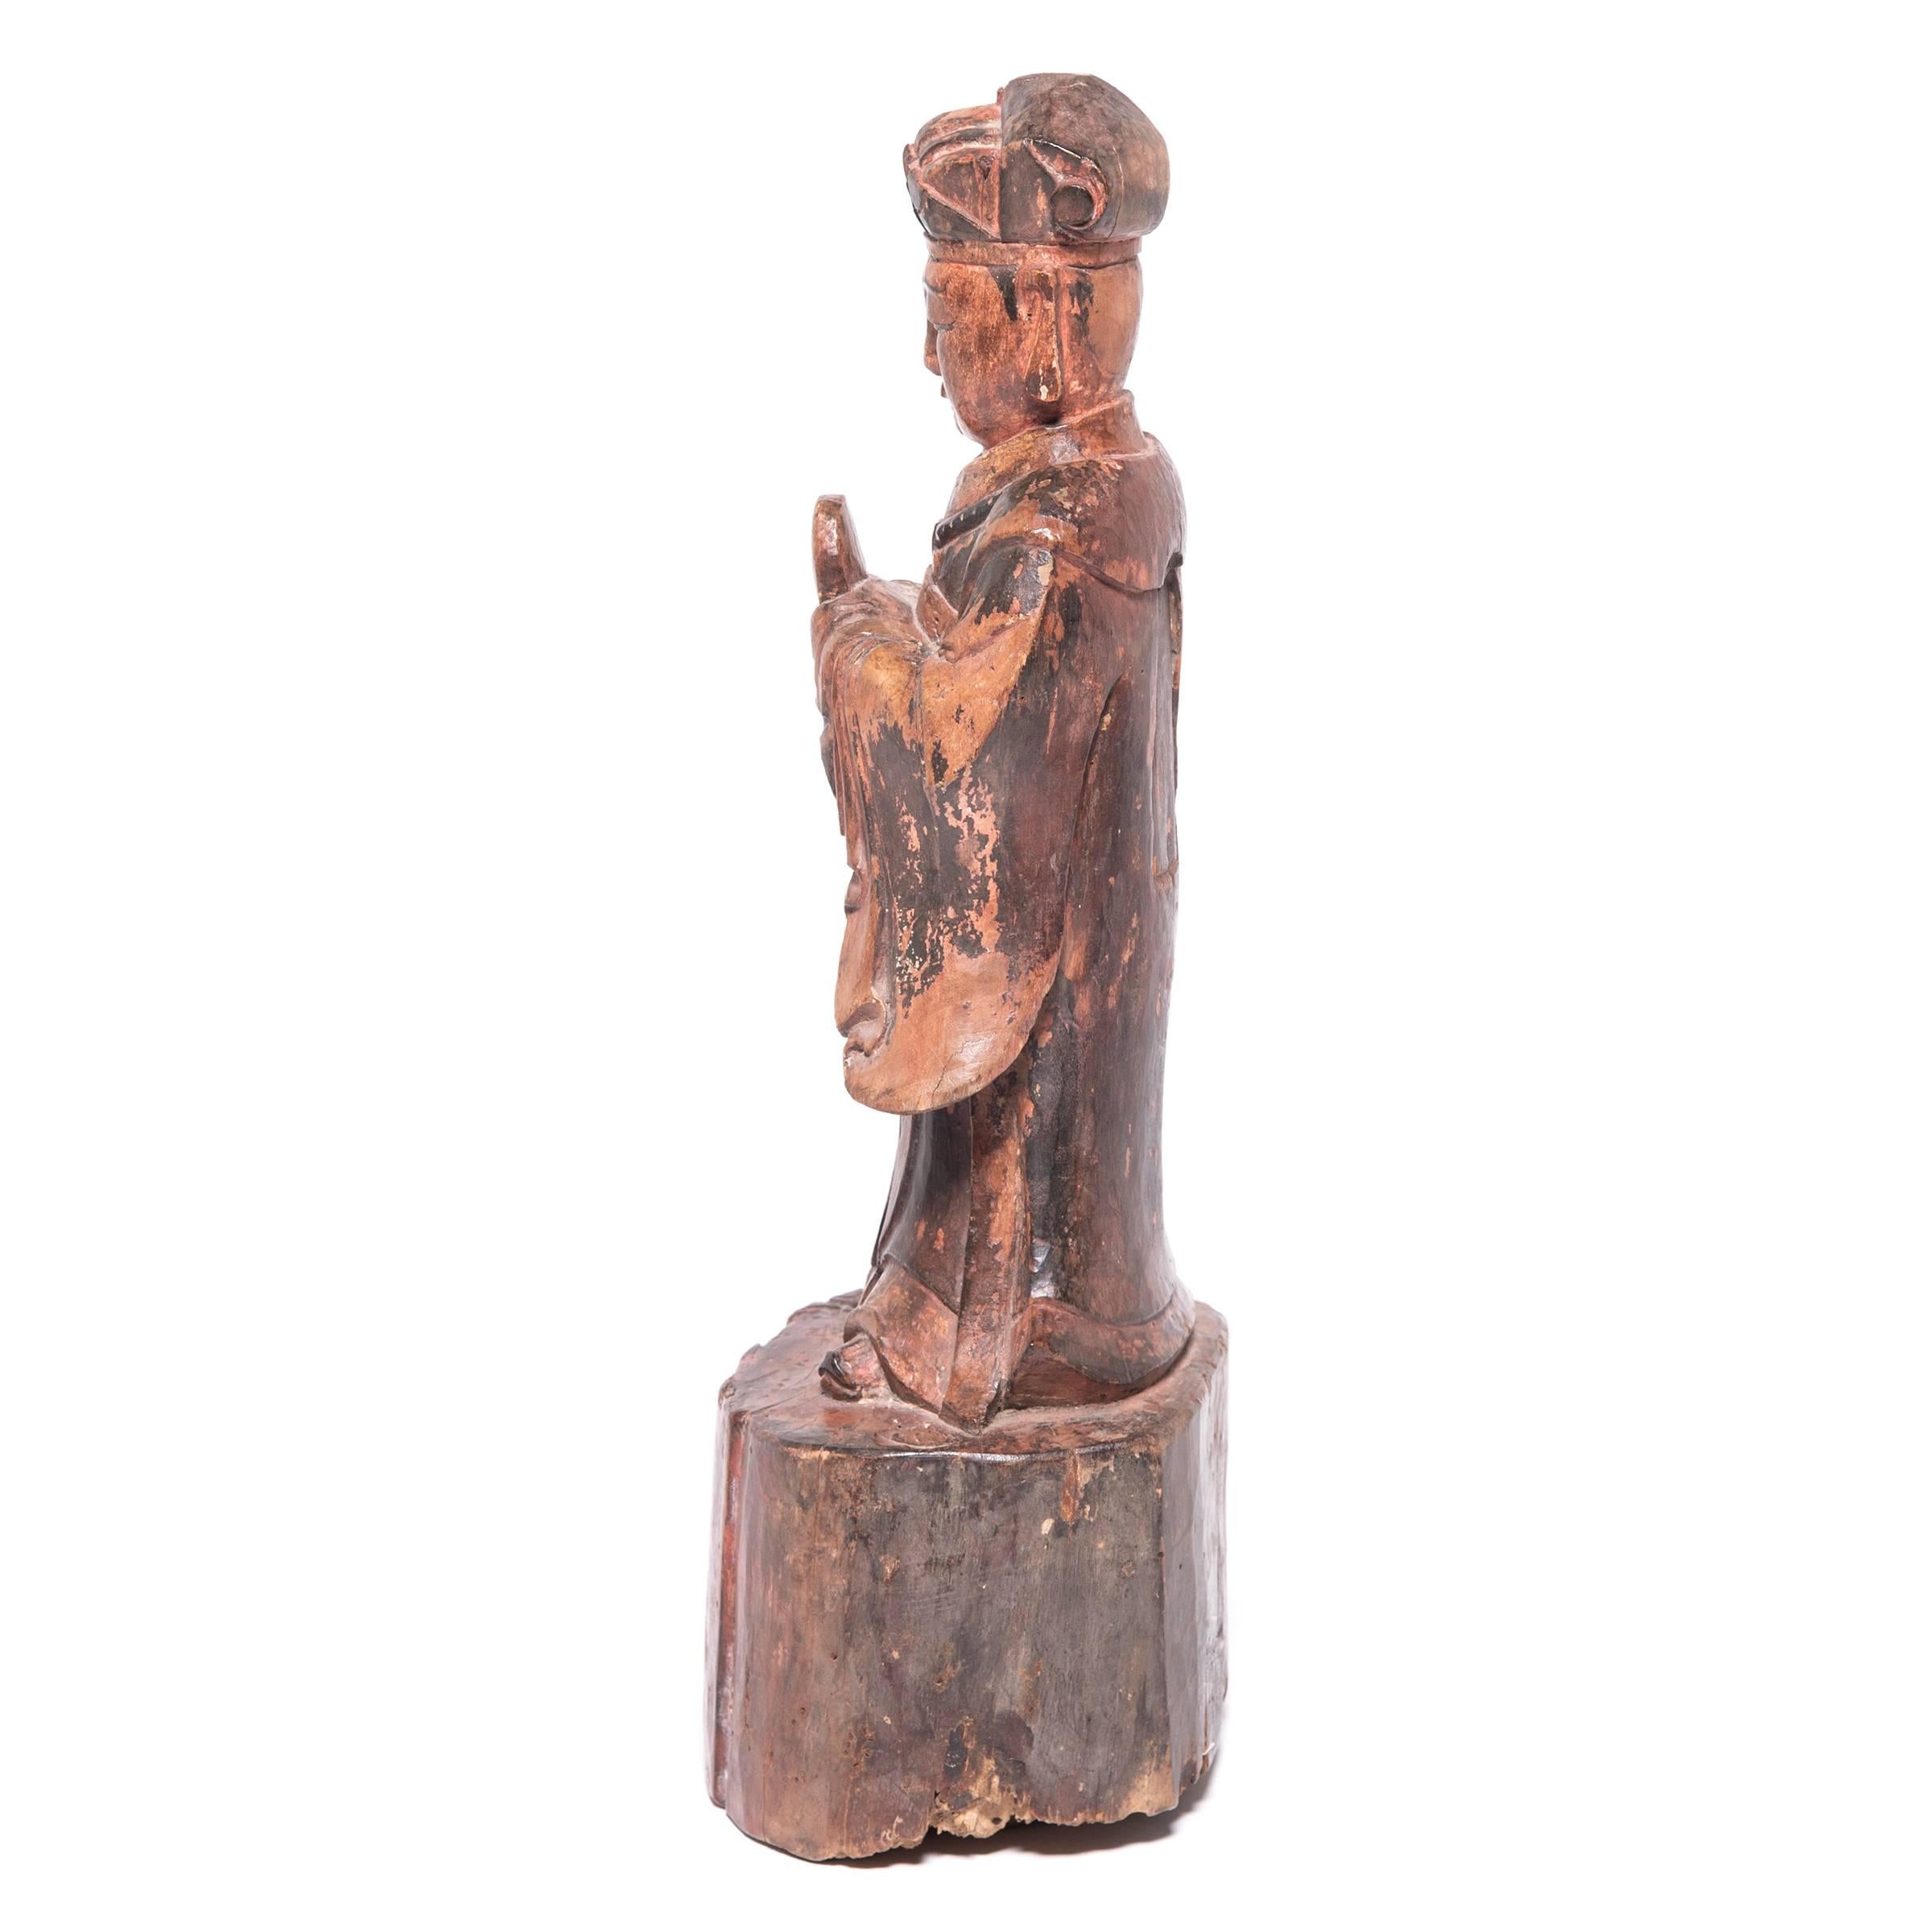 Carved in wood, this 19th century figure of a spirit paid tribute to ancestors past on a traditional altar table. Allowing the base to reflect the wood’s natural state, the artist carved the figure with detailed robes and distinguishable features,